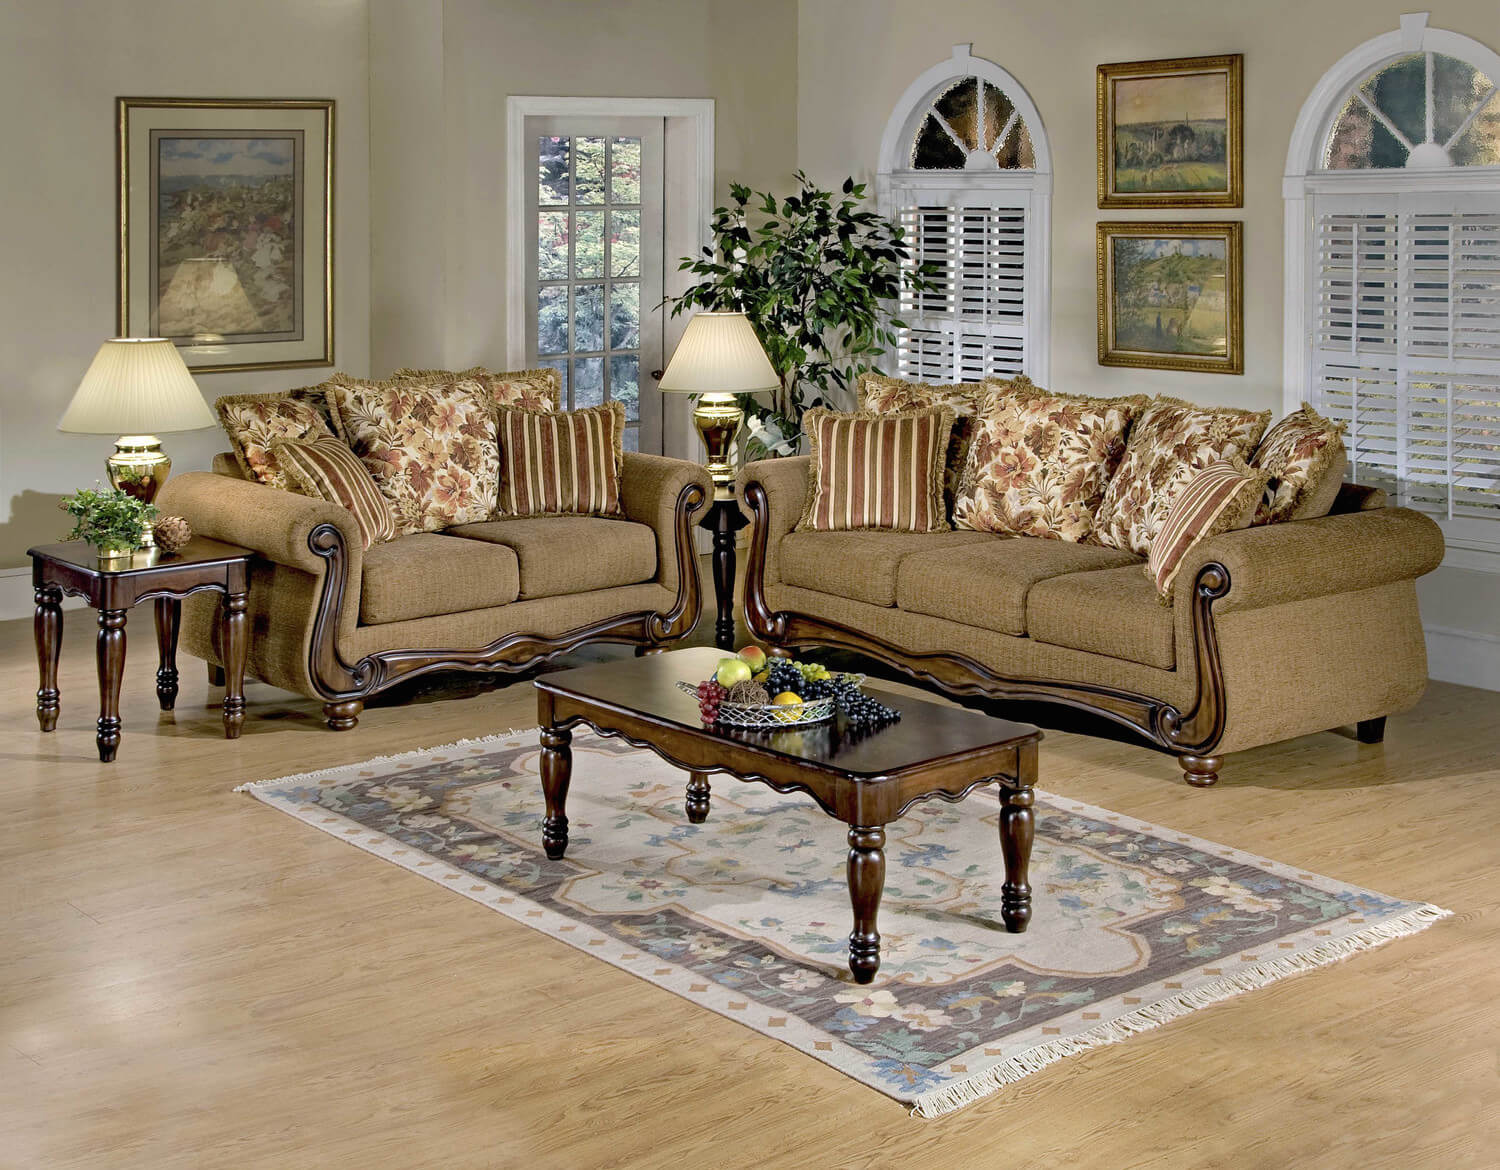 This is an example of traditional living room interior design style.